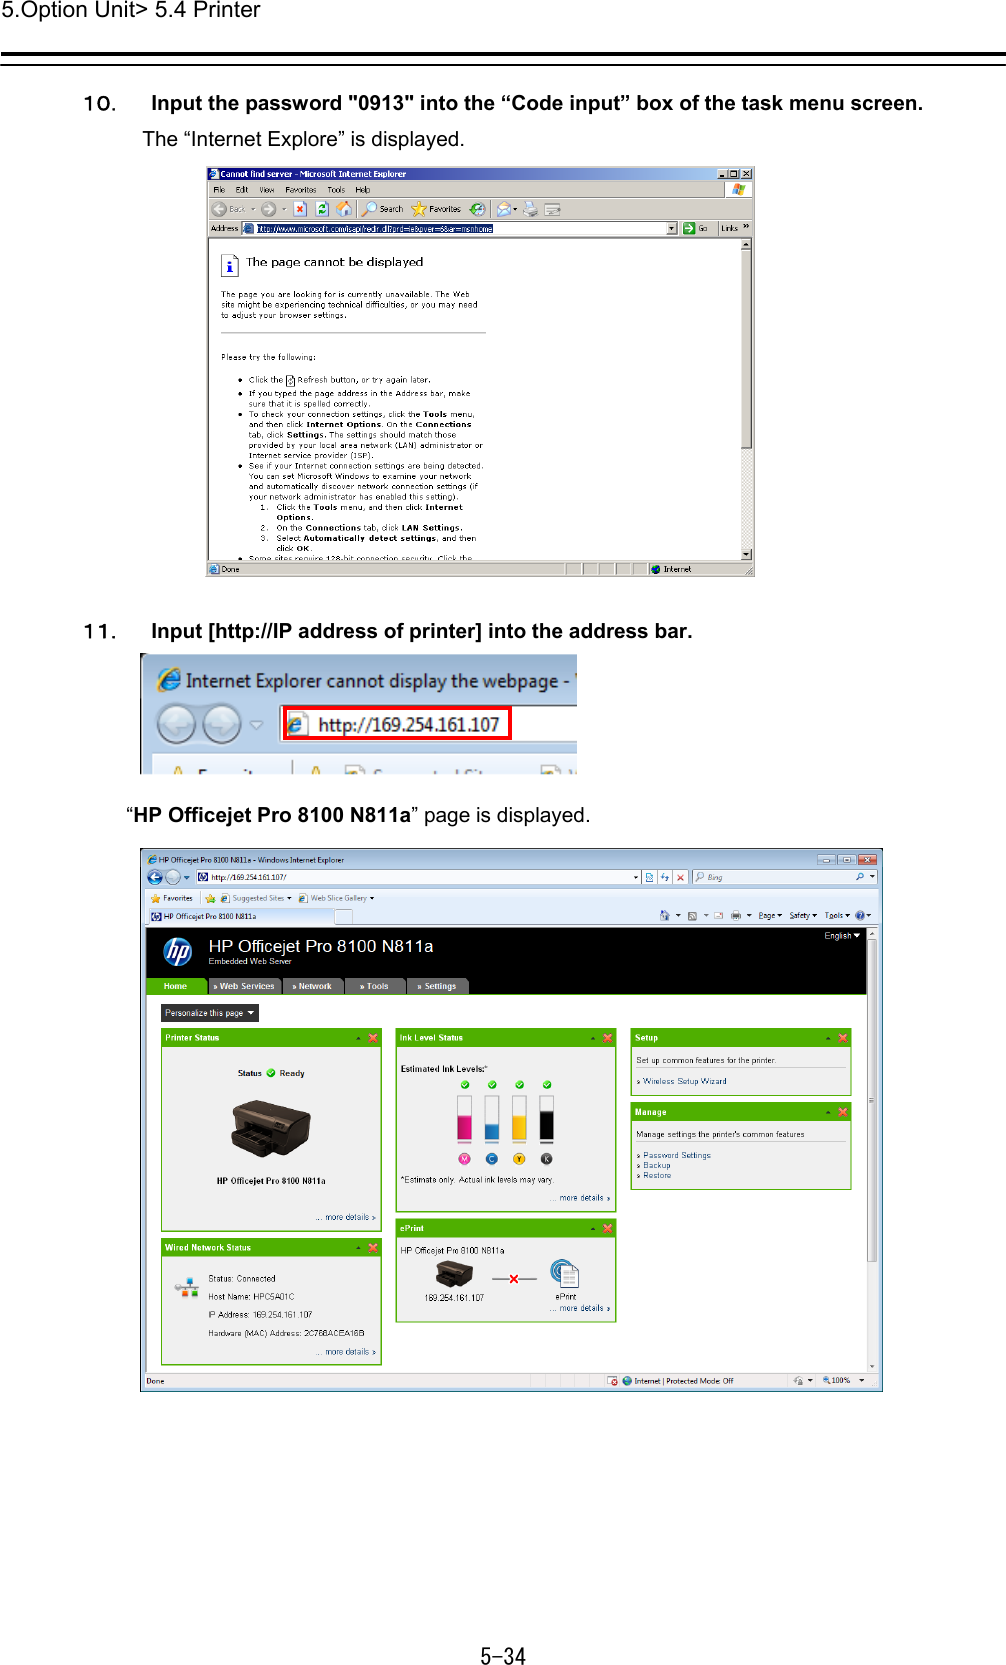 5.Option Unit&gt; 5.4 Printer 5-34  １０． Input the password &quot;0913&quot; into the “Code input” box of the task menu screen. The “Internet Explore” is displayed.   １１． Input [http://IP address of printer] into the address bar.  “HP Officejet Pro 8100 N811a” page is displayed.  